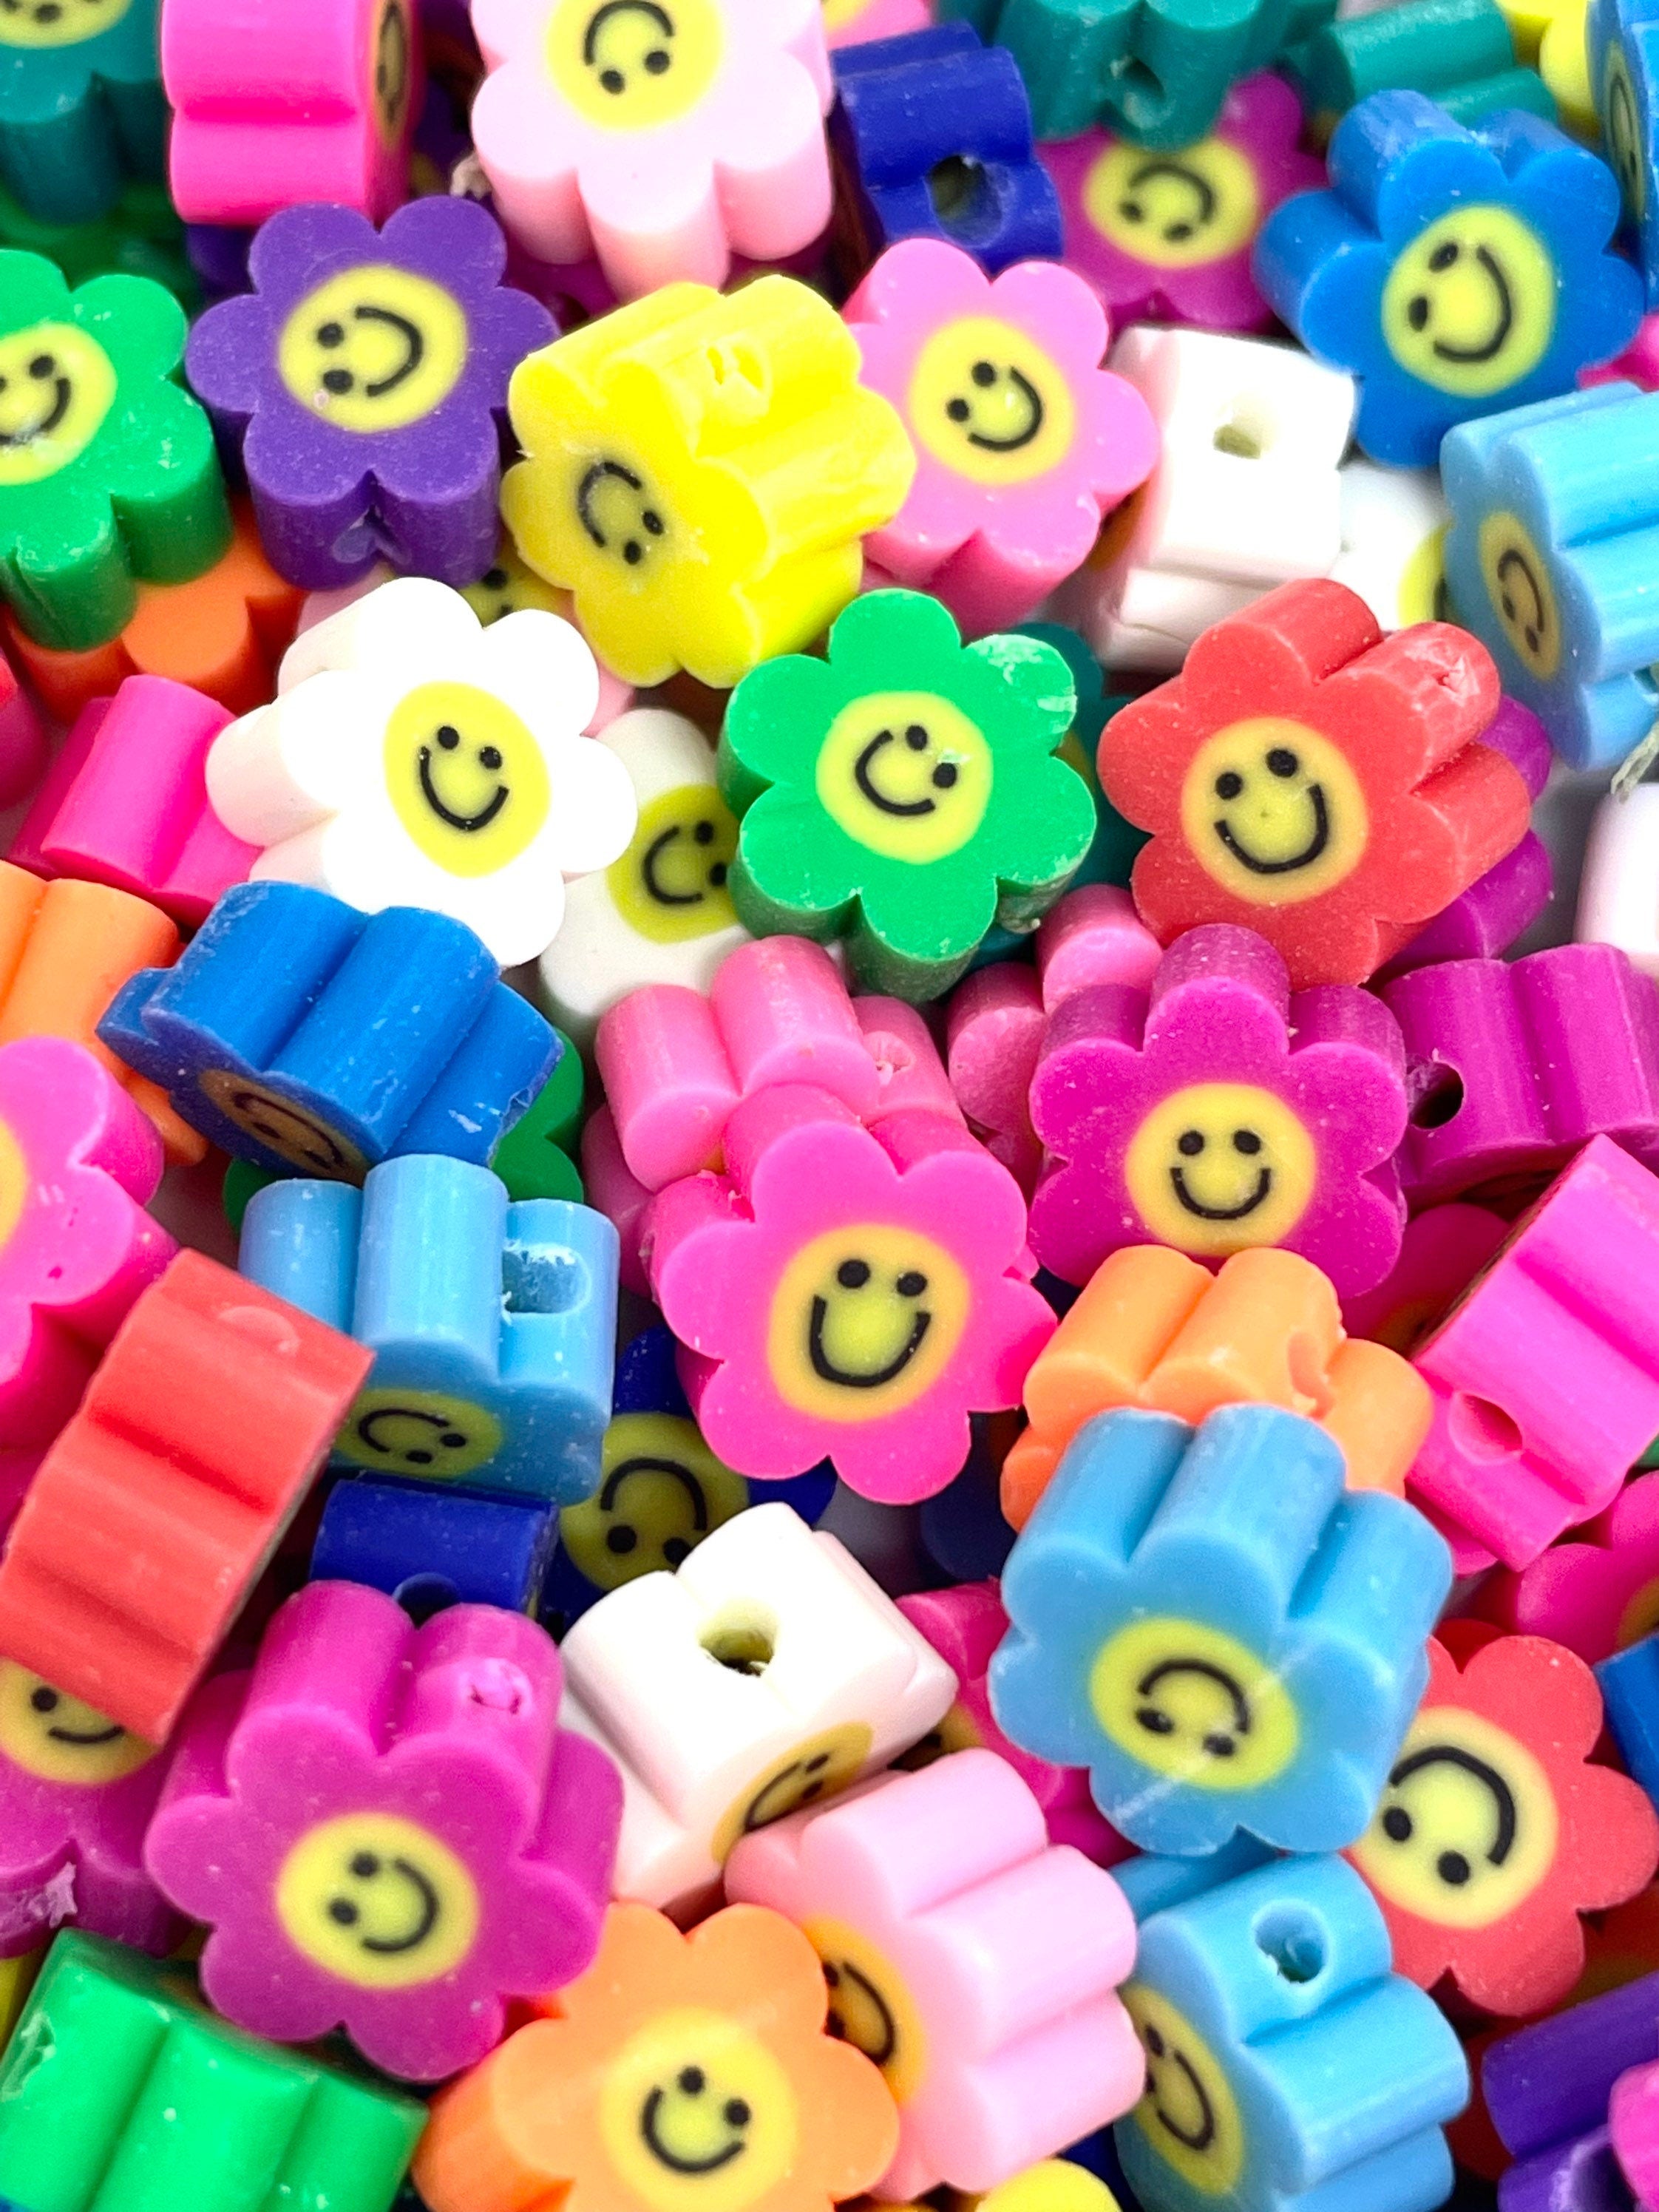 Cute Flower Beads, Smiley Face Flower Beads for Jewelry Making